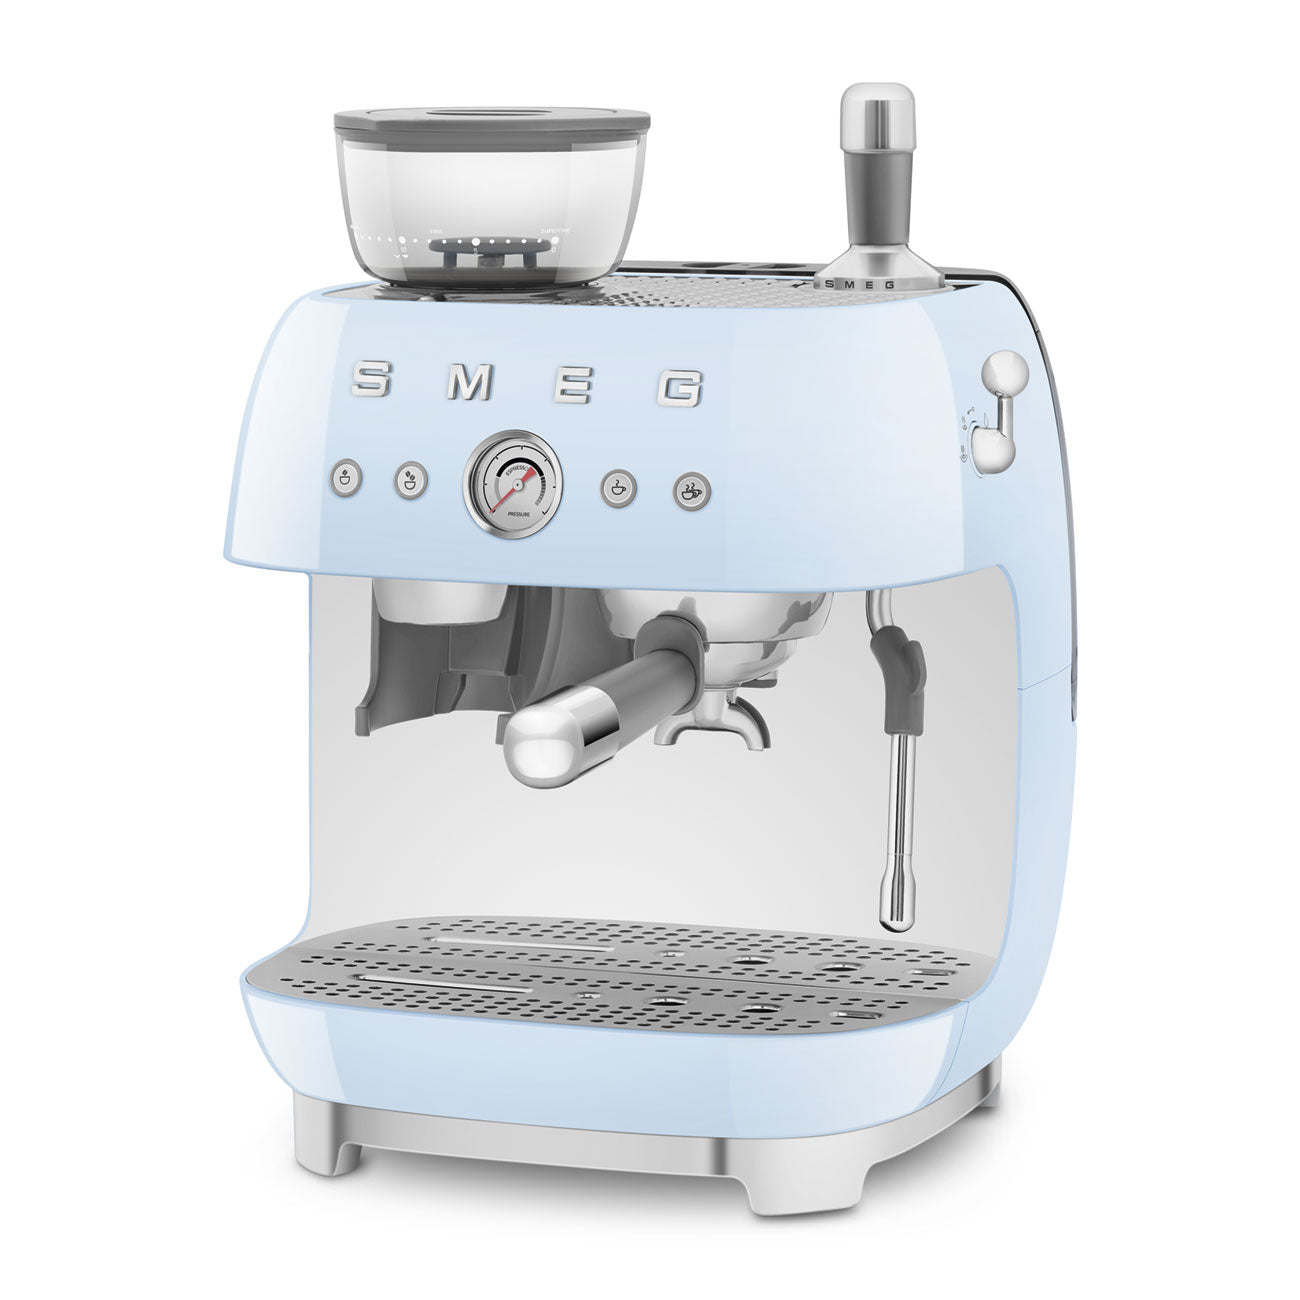 SMEG EGF03 Bean to Cup Coffee Machine - Pastel Blue from MagicVision